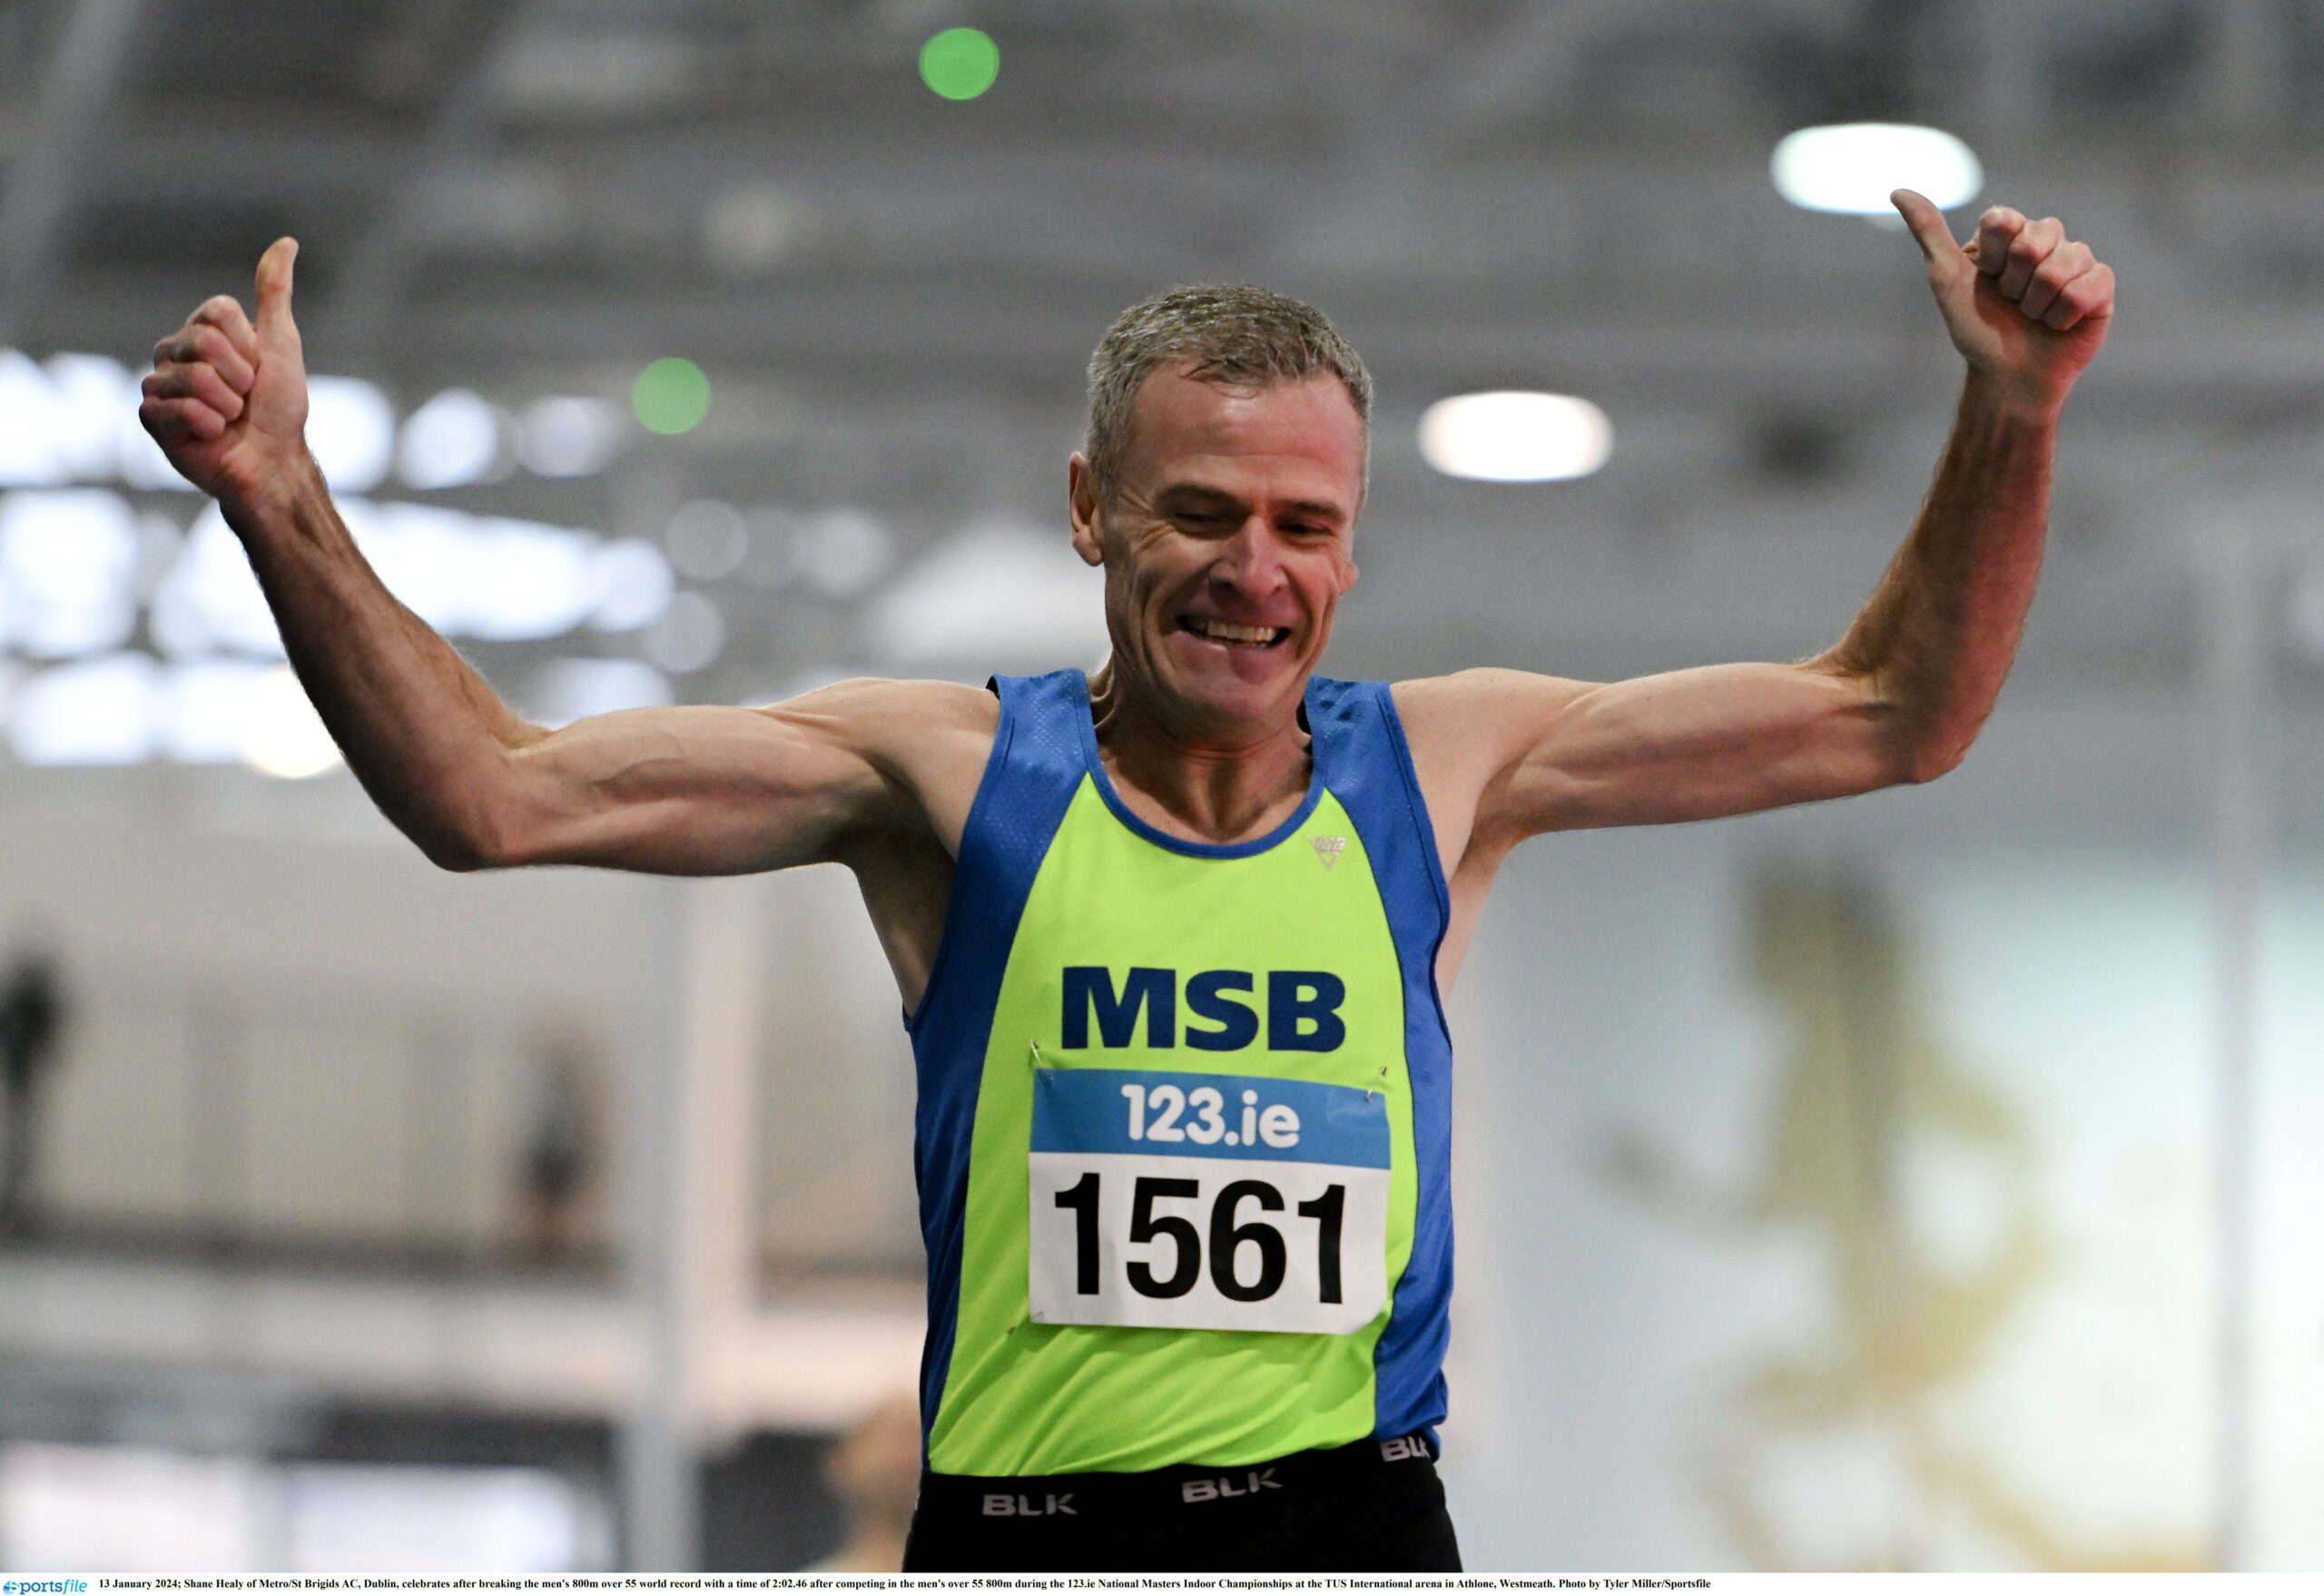 Shane Healy - National Masters Indoor Championships